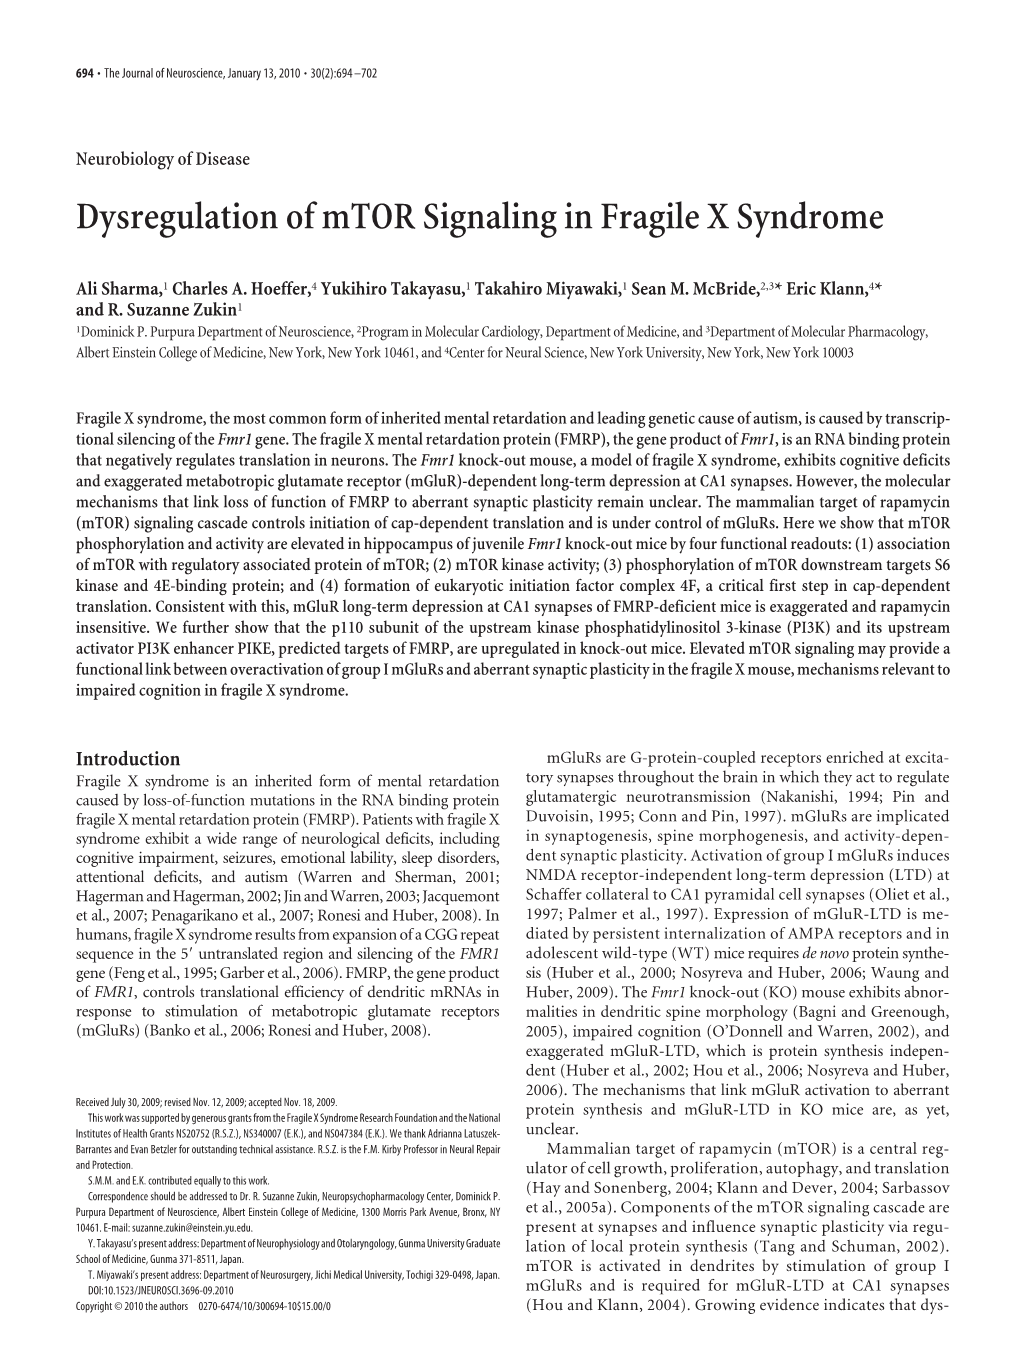 Dysregulation of Mtor Signaling in Fragile X Syndrome